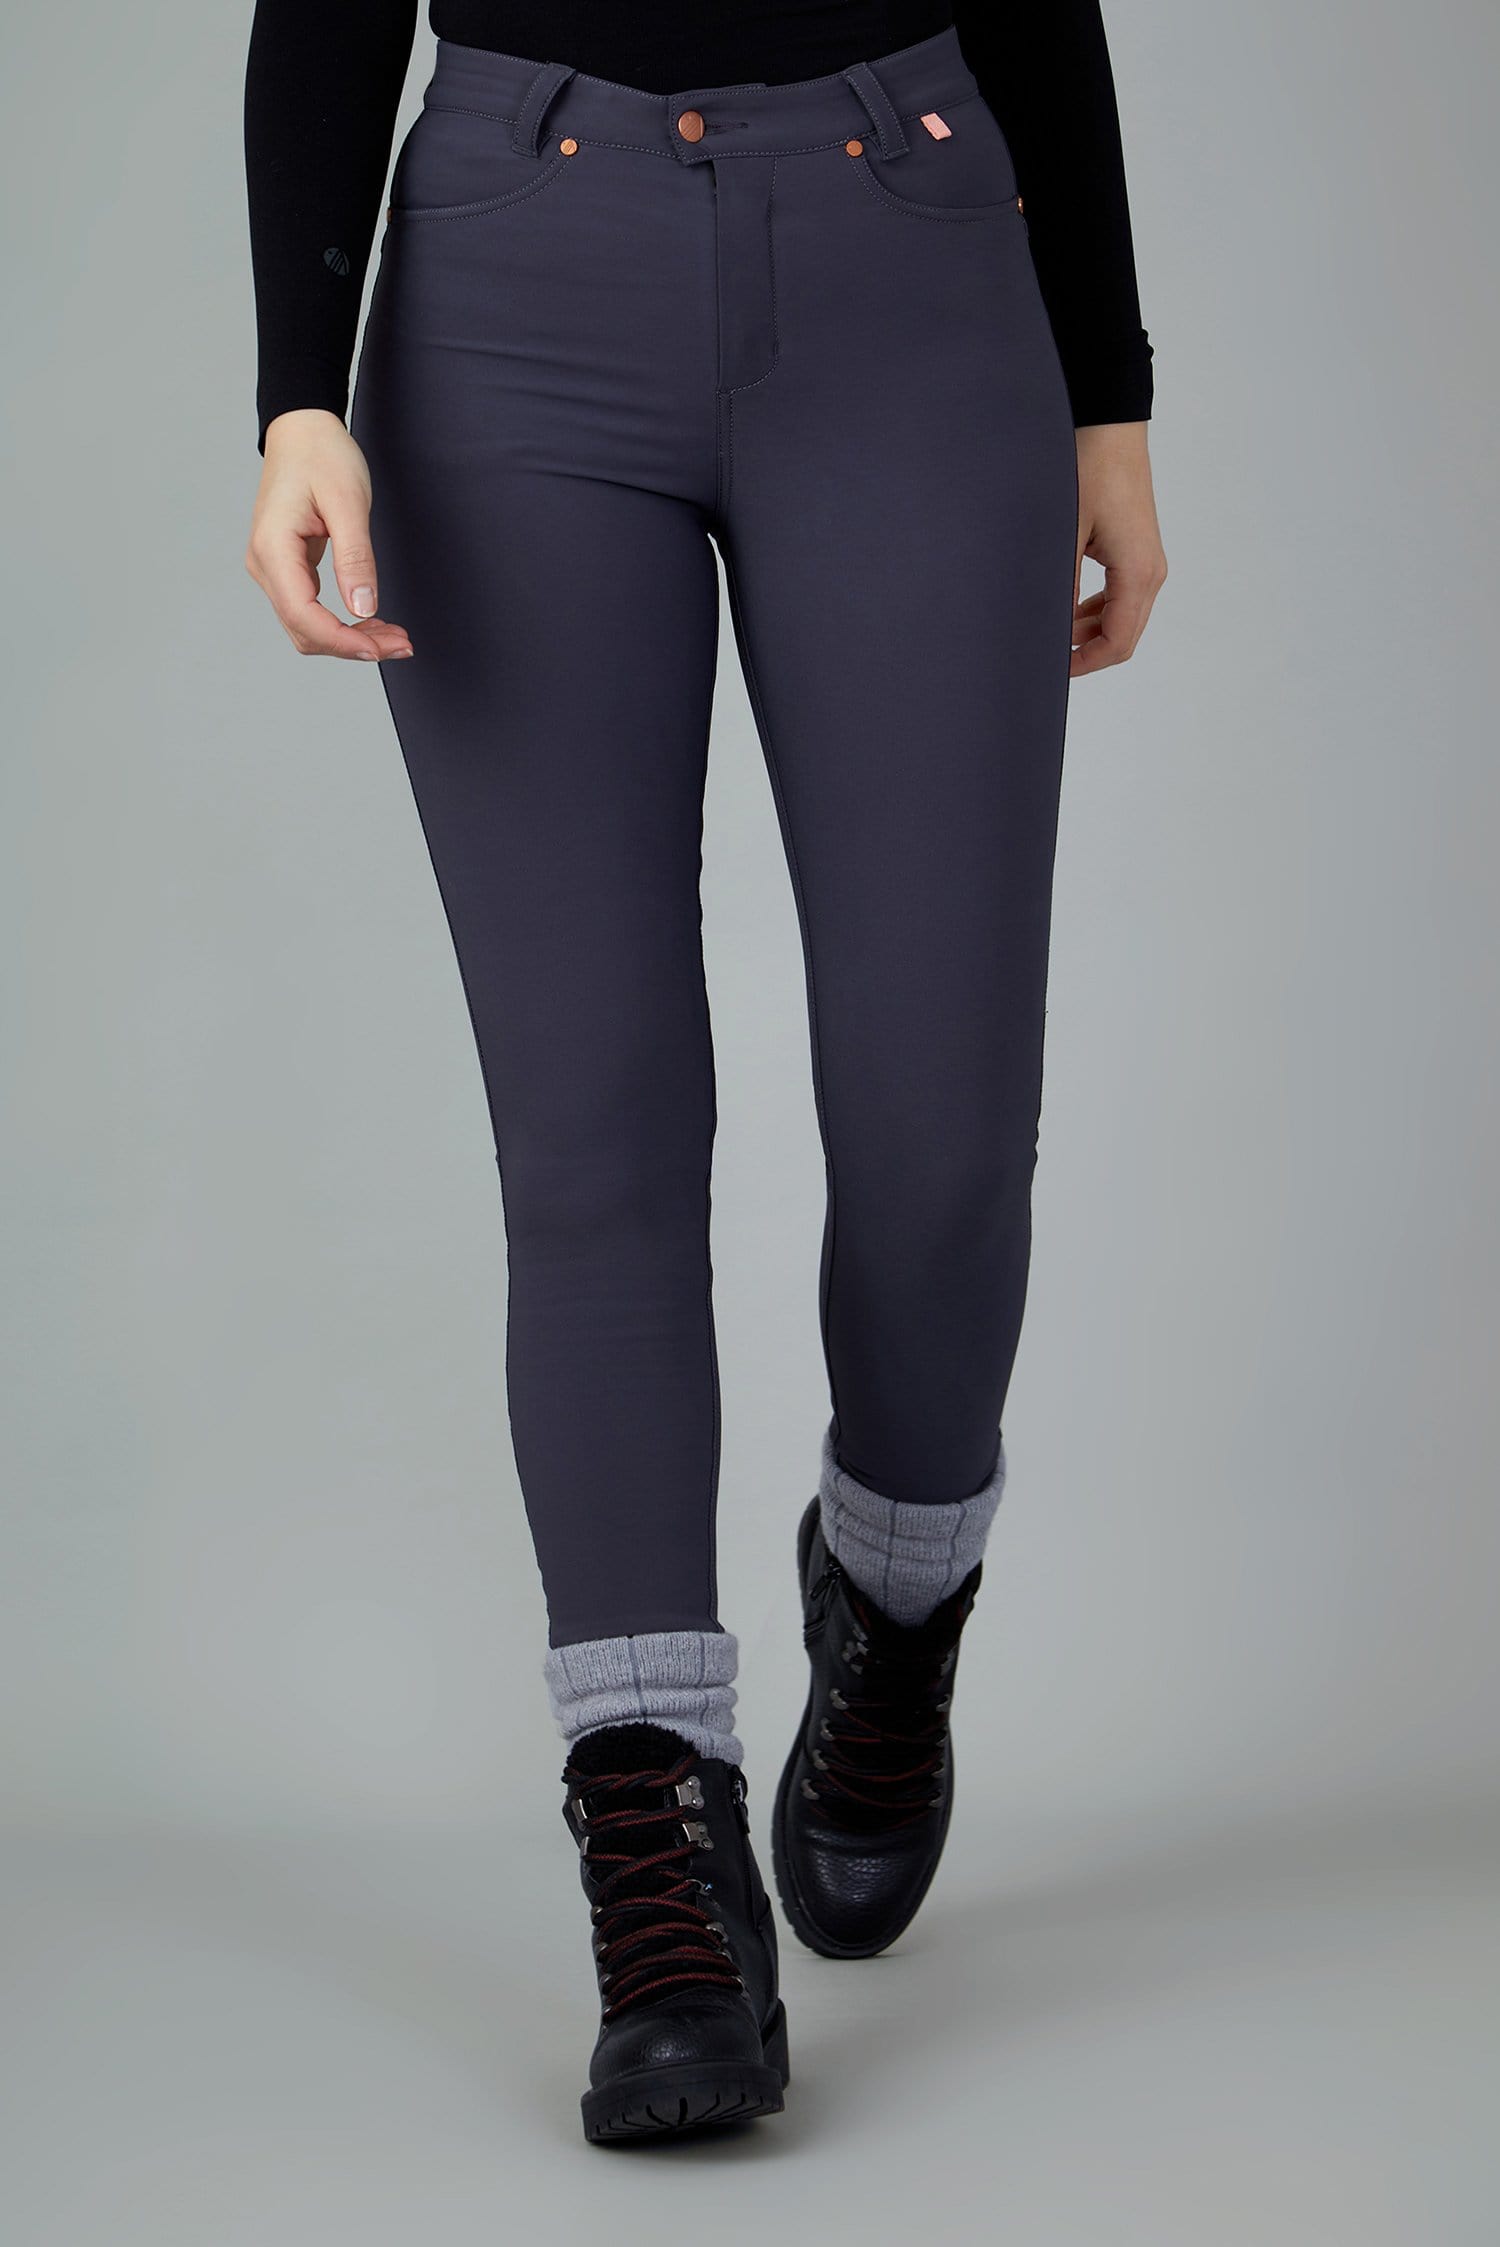 The Aventurite Stretch Skinny Outdoor Trousers - Obsidian - 30r / Uk12 - Womens - Acai Outdoorwear